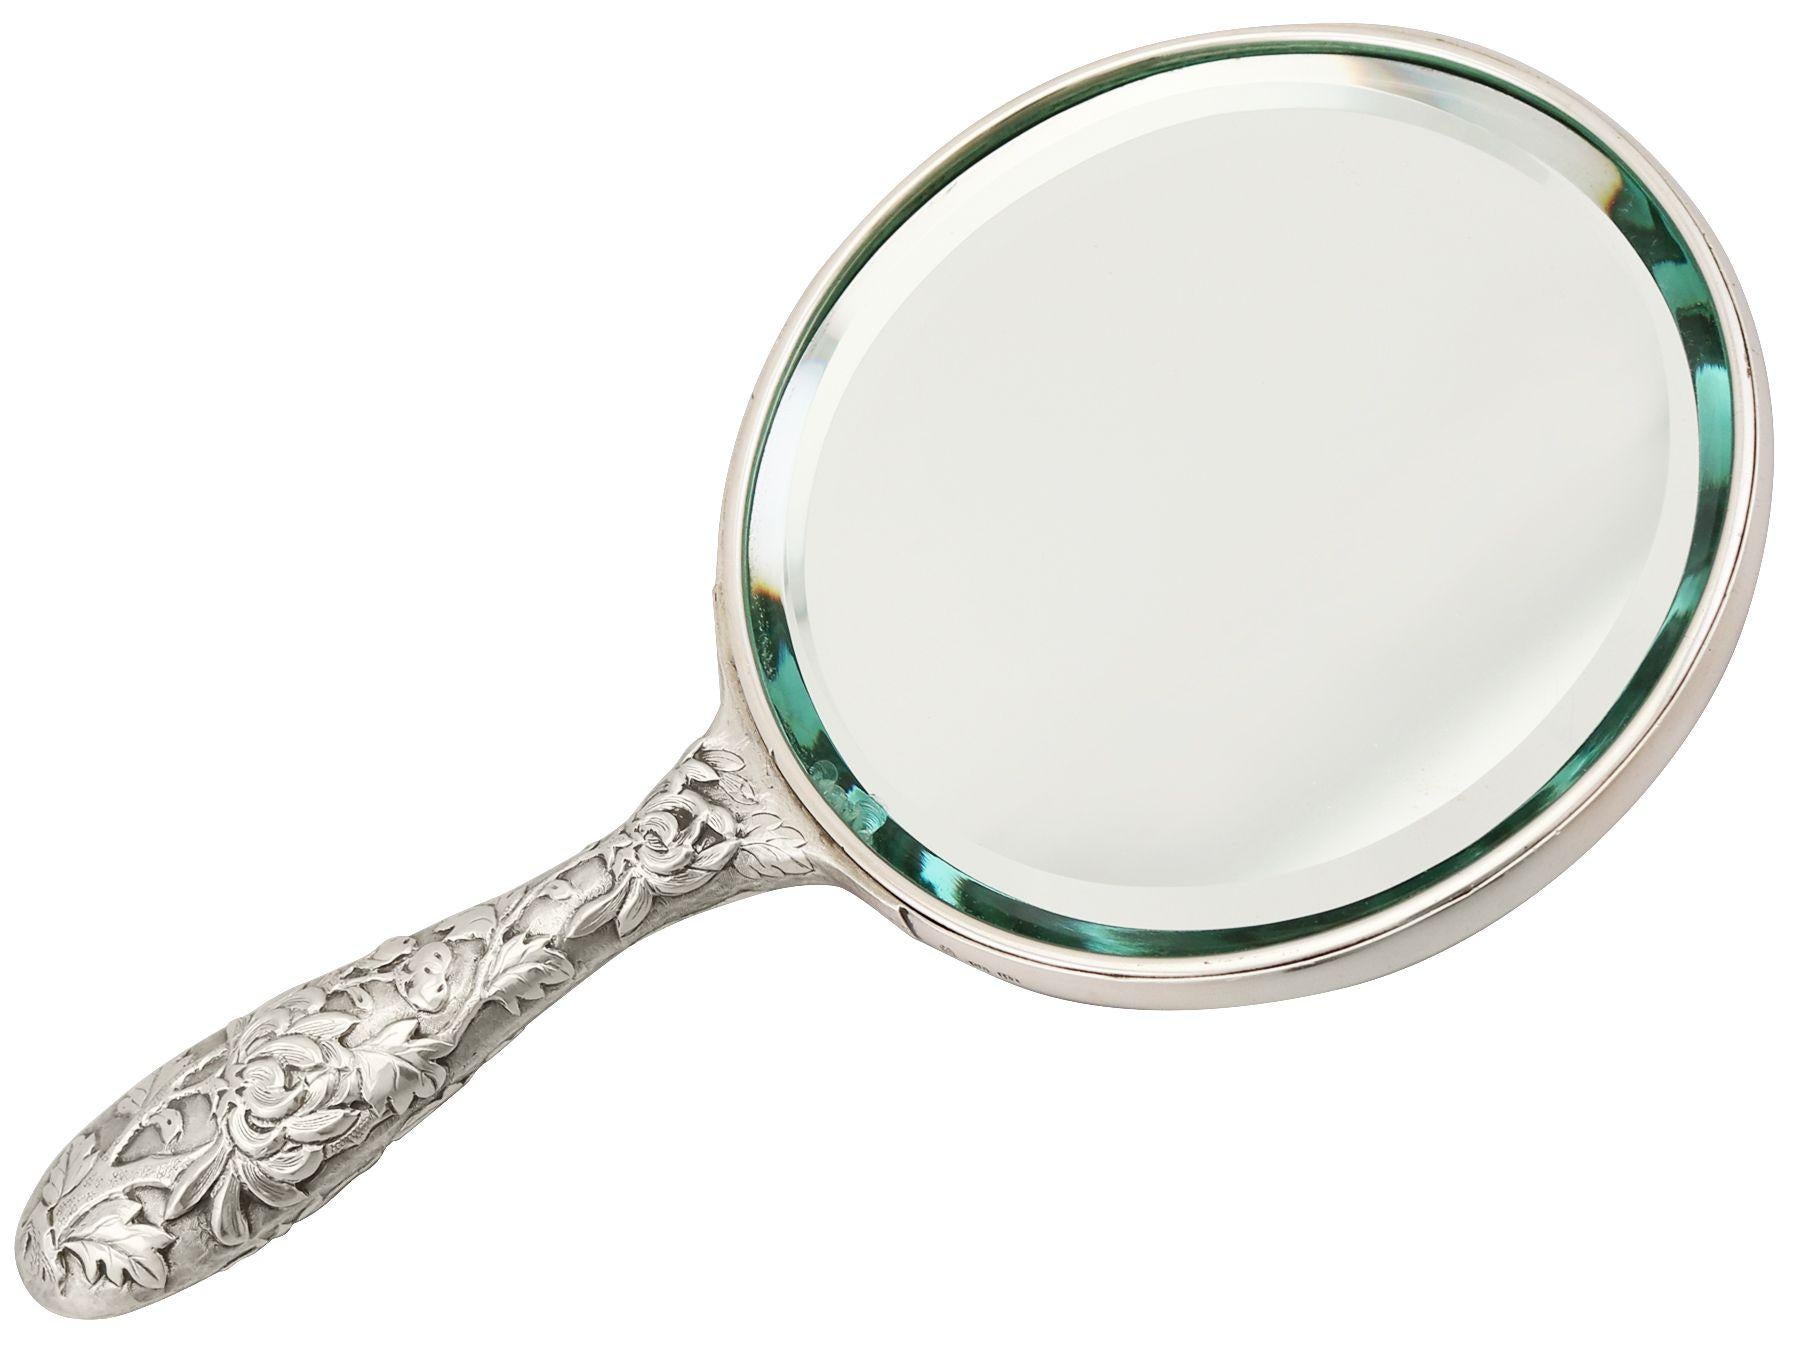 Early 20th Century Chinese Export Silver Hand Mirror, Antique, circa 1900